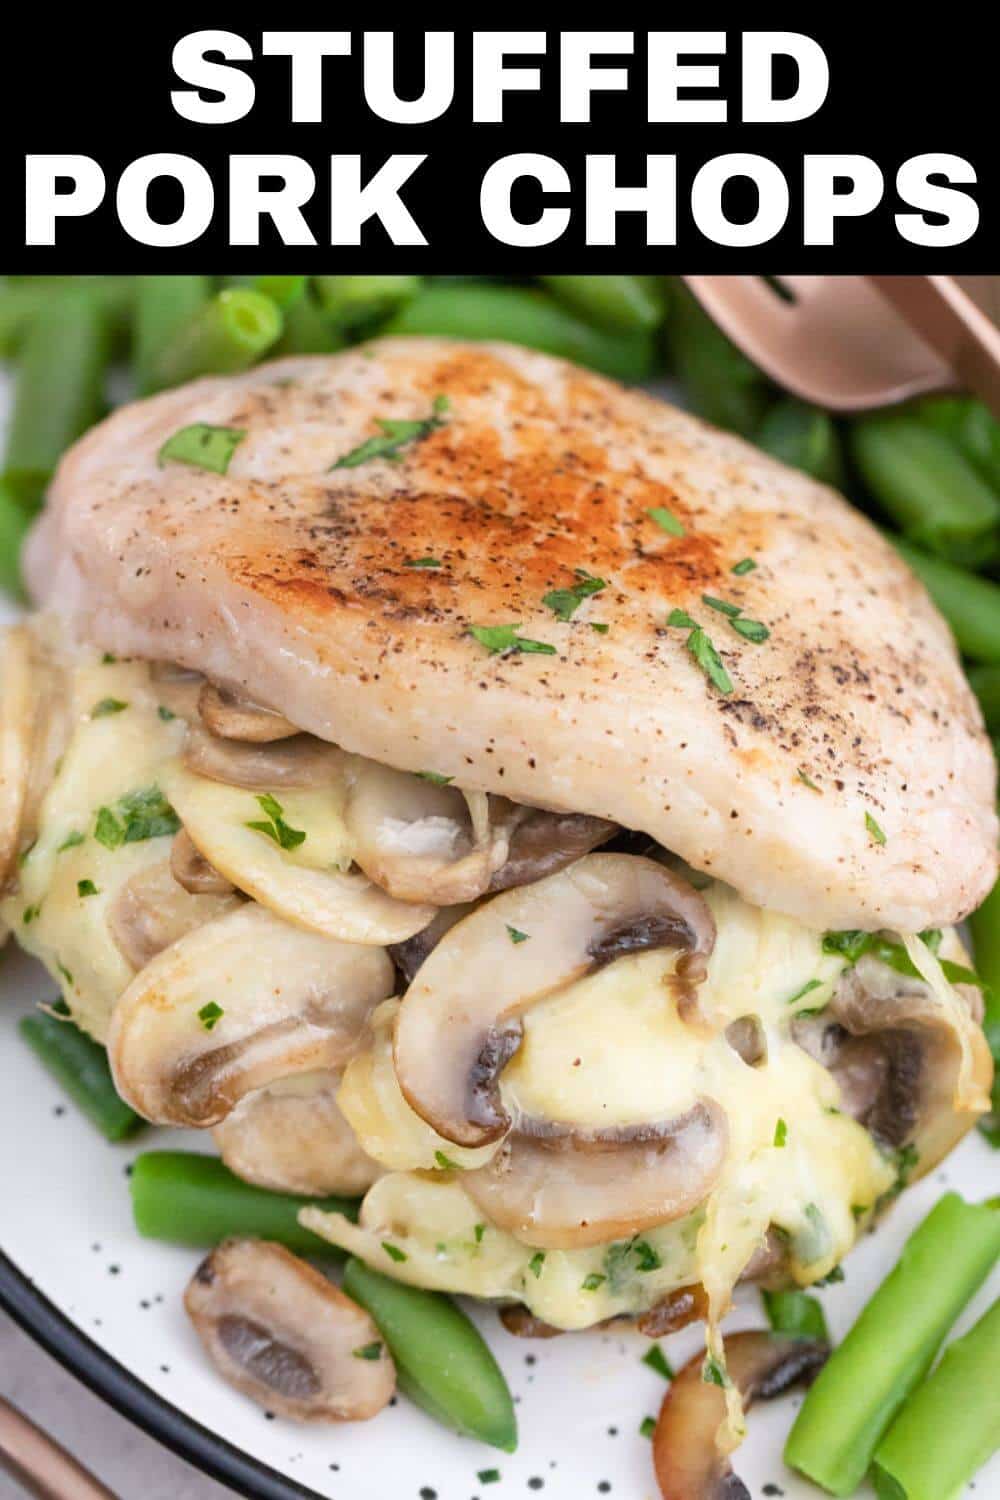 Stuffed pork chops with mushrooms and green beans.